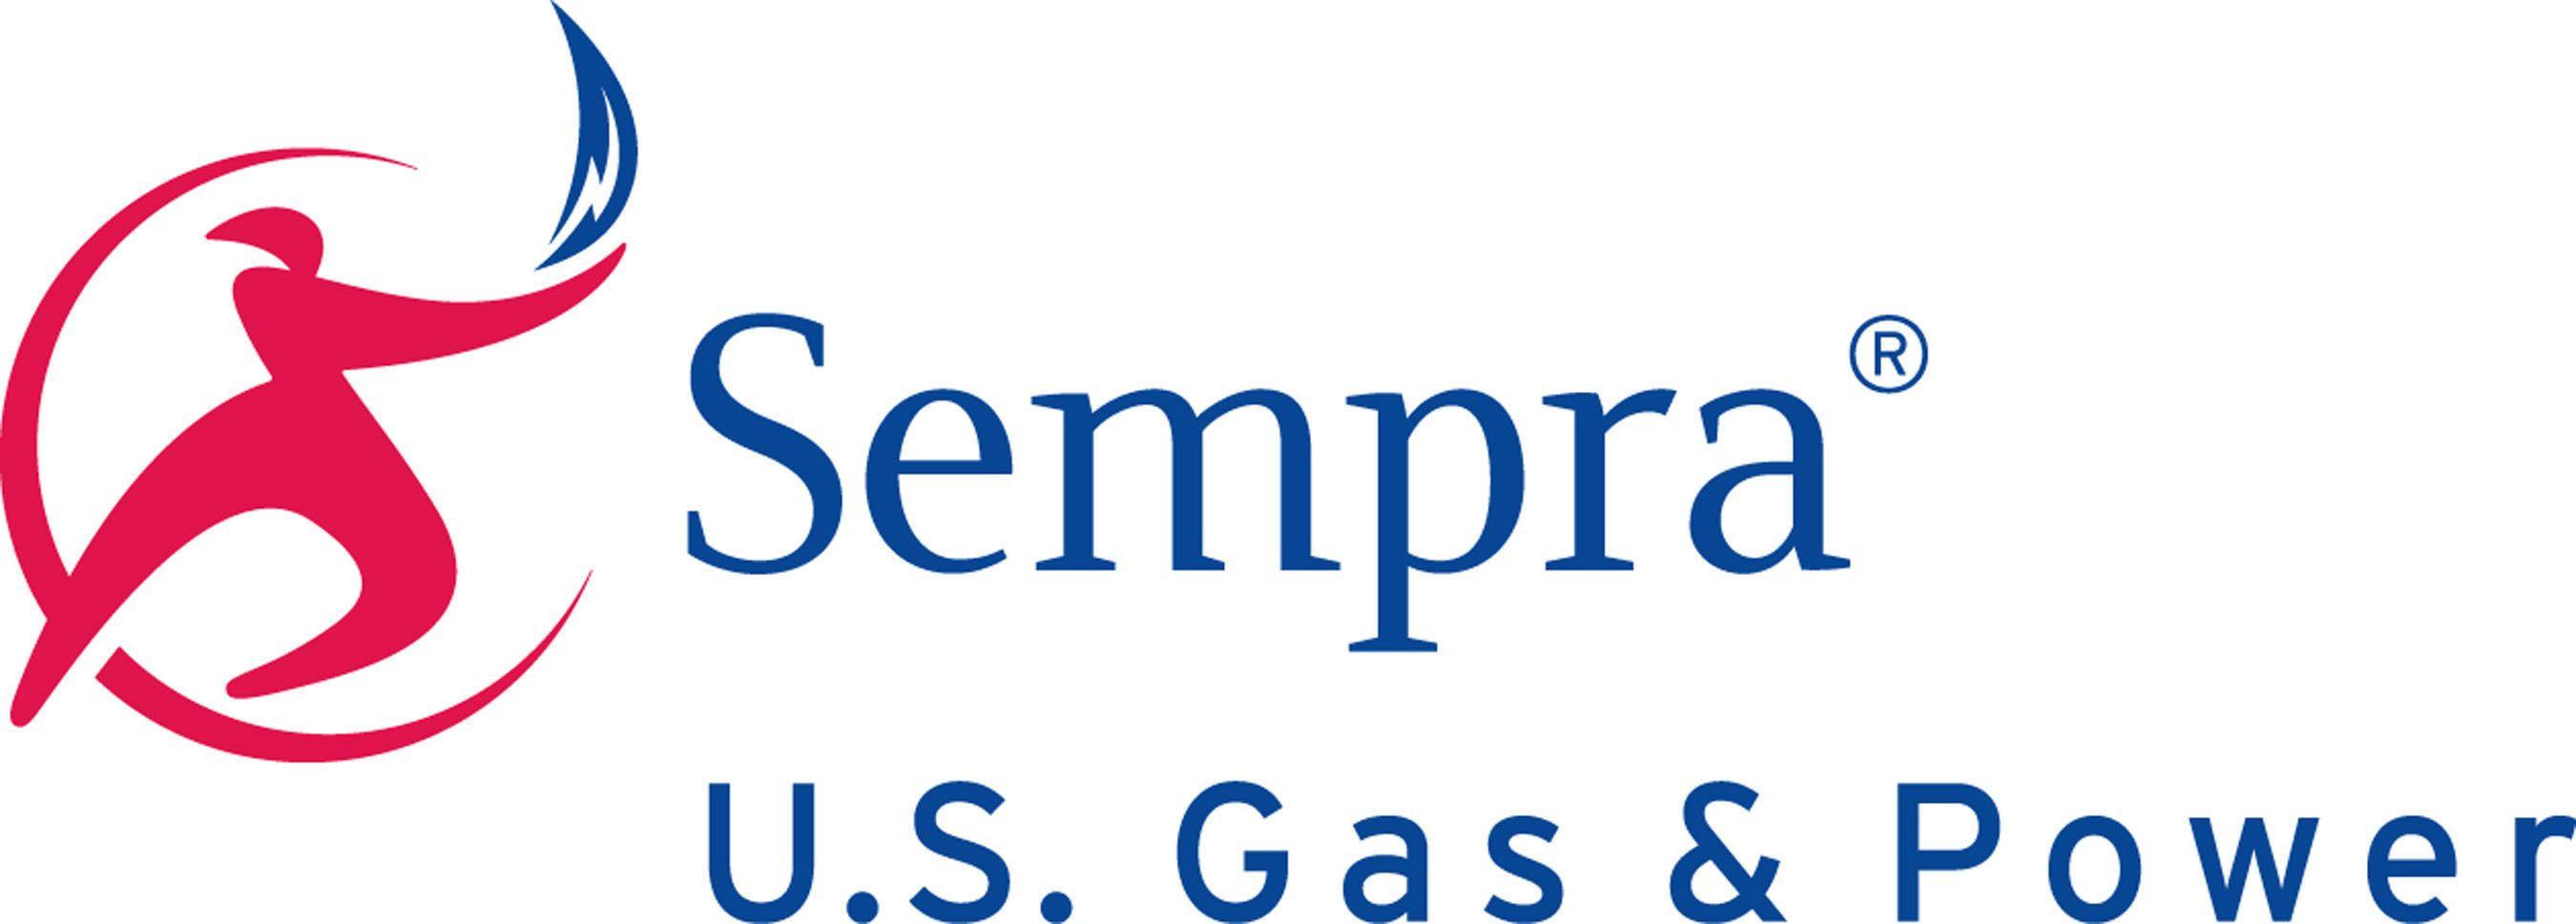 Mobile Gas Logo - Sempra U.S. Gas & Power To Sell Parent Company Of Mobile Gas And ...